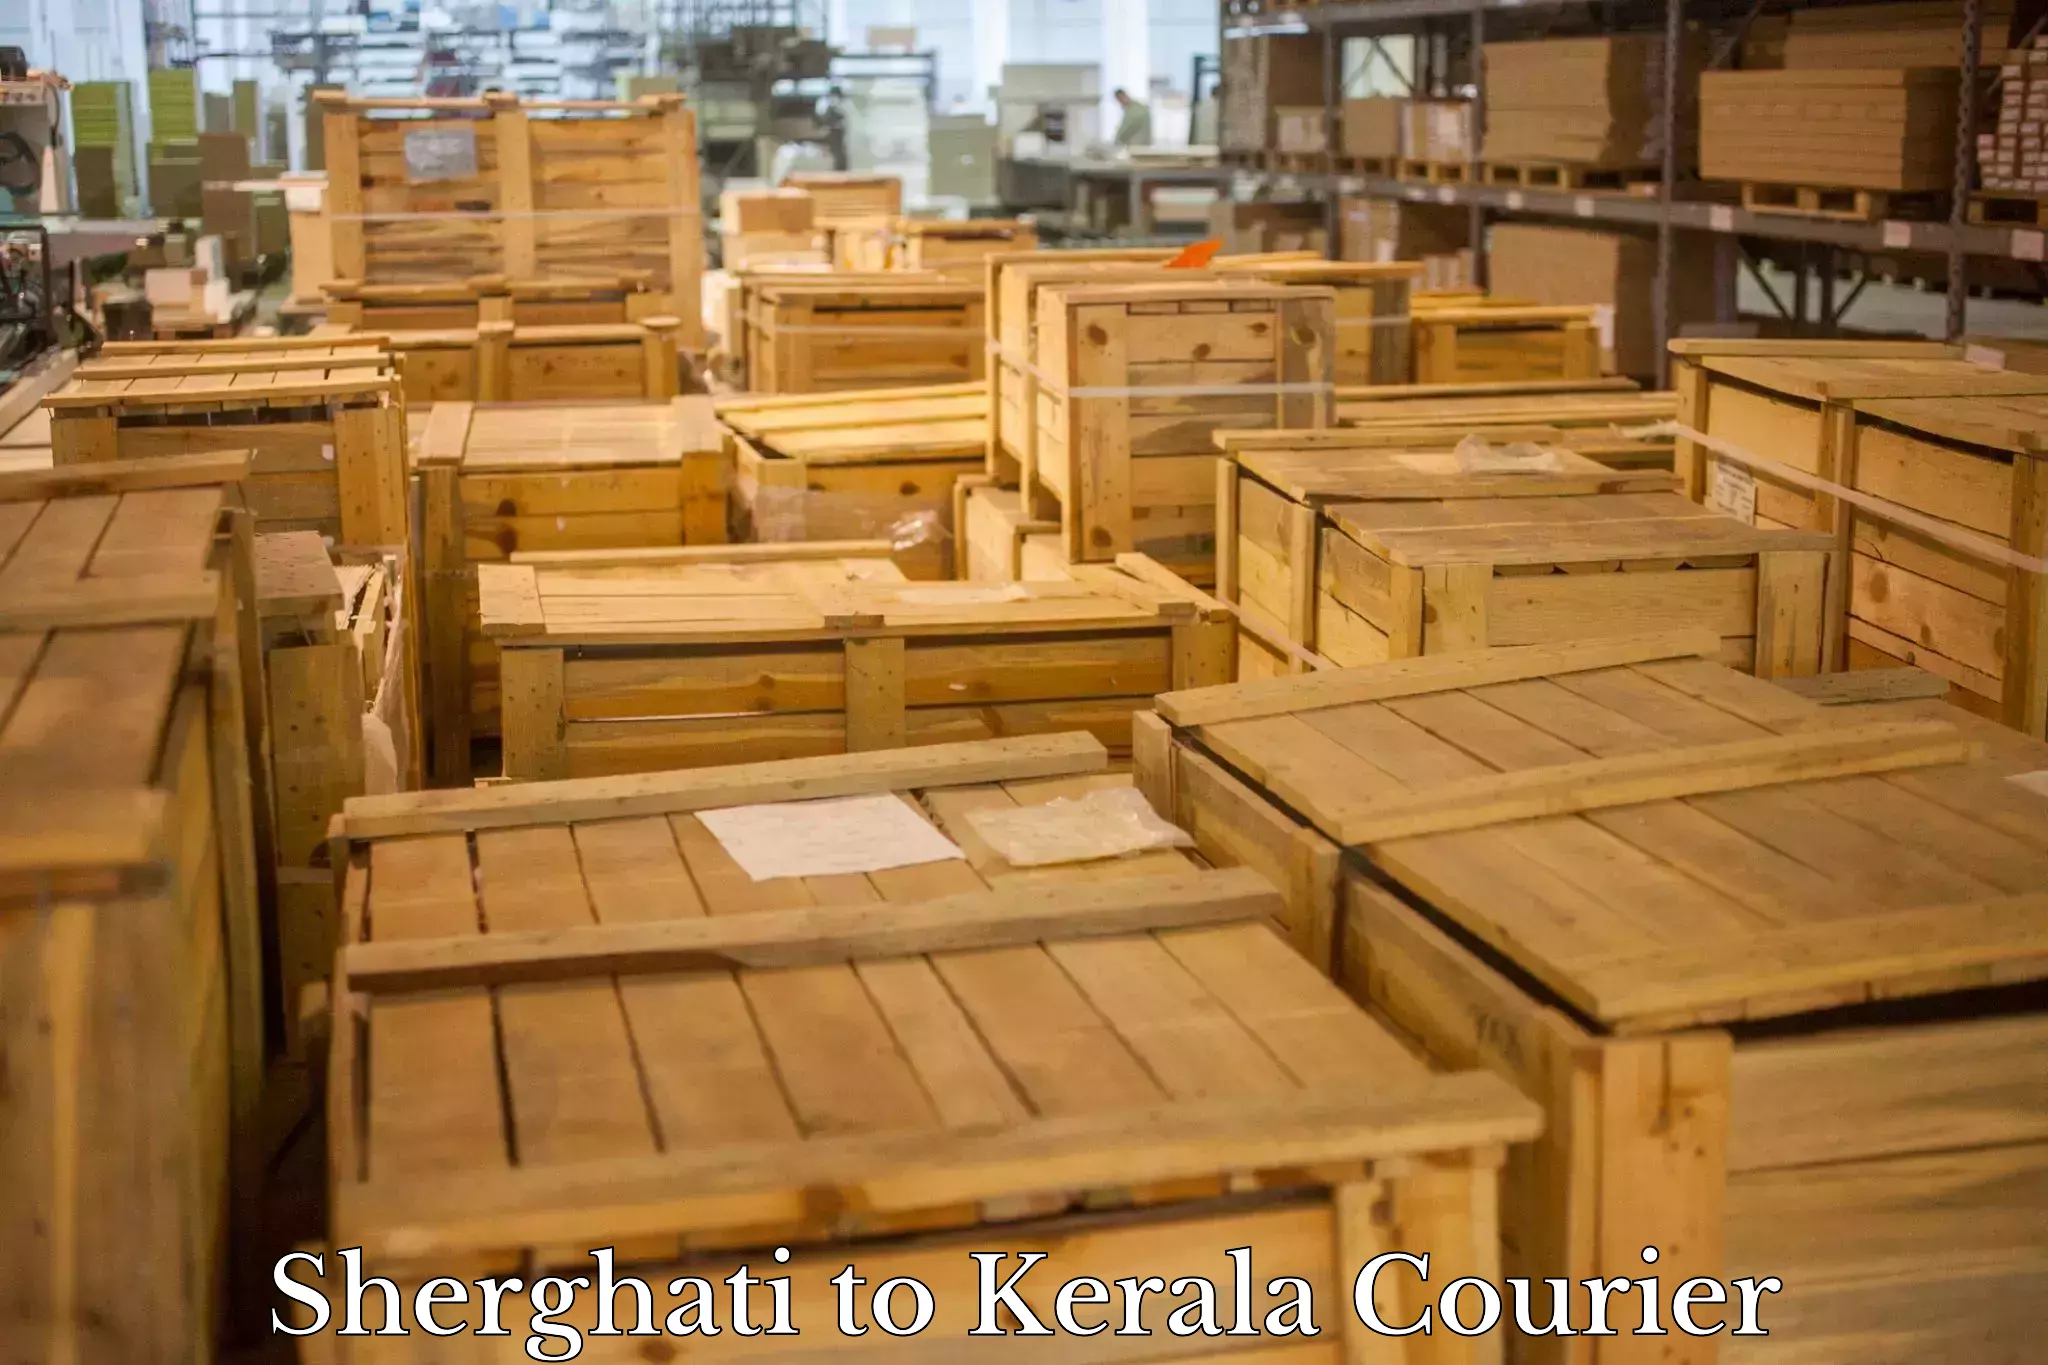 Cargo delivery service Sherghati to Kerala